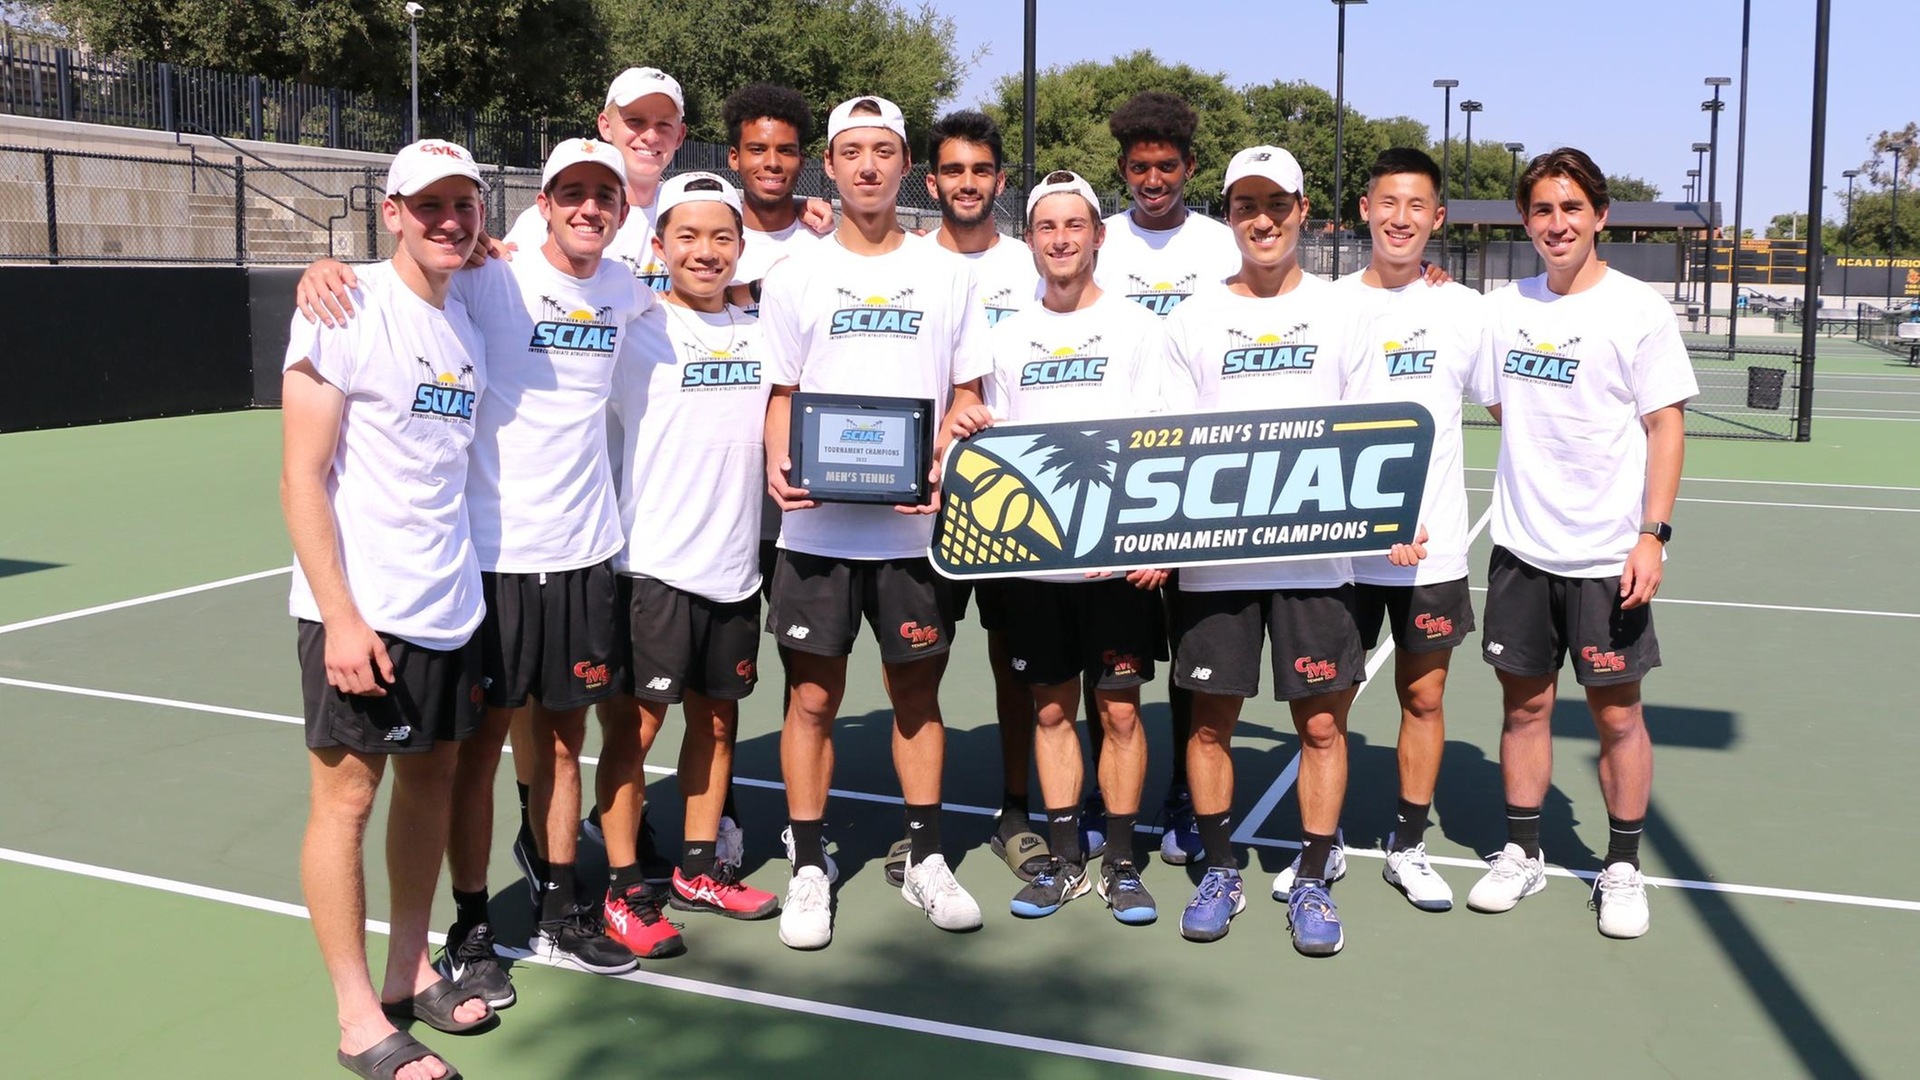 The CMS men's tennis team earned ITA All-Academic Team honors to go with its SCIAC title